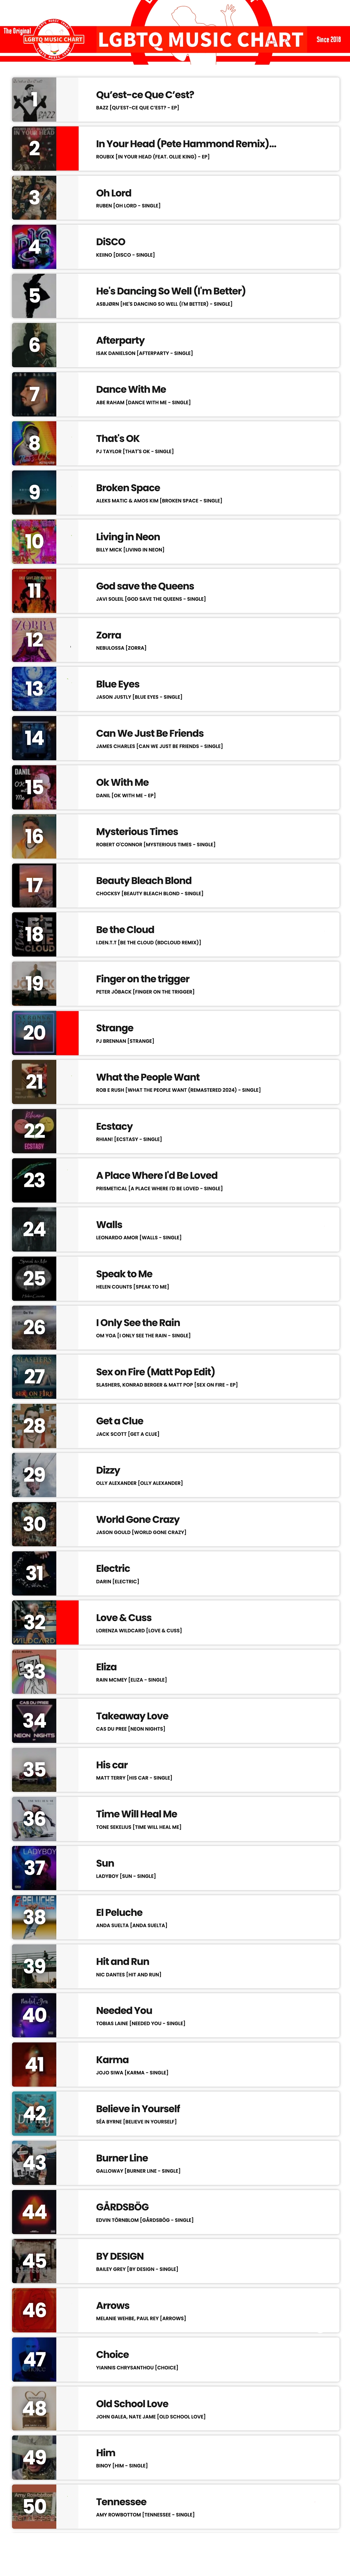 Showing top 50 of LGBTQ Music Chart for Week 19 2024